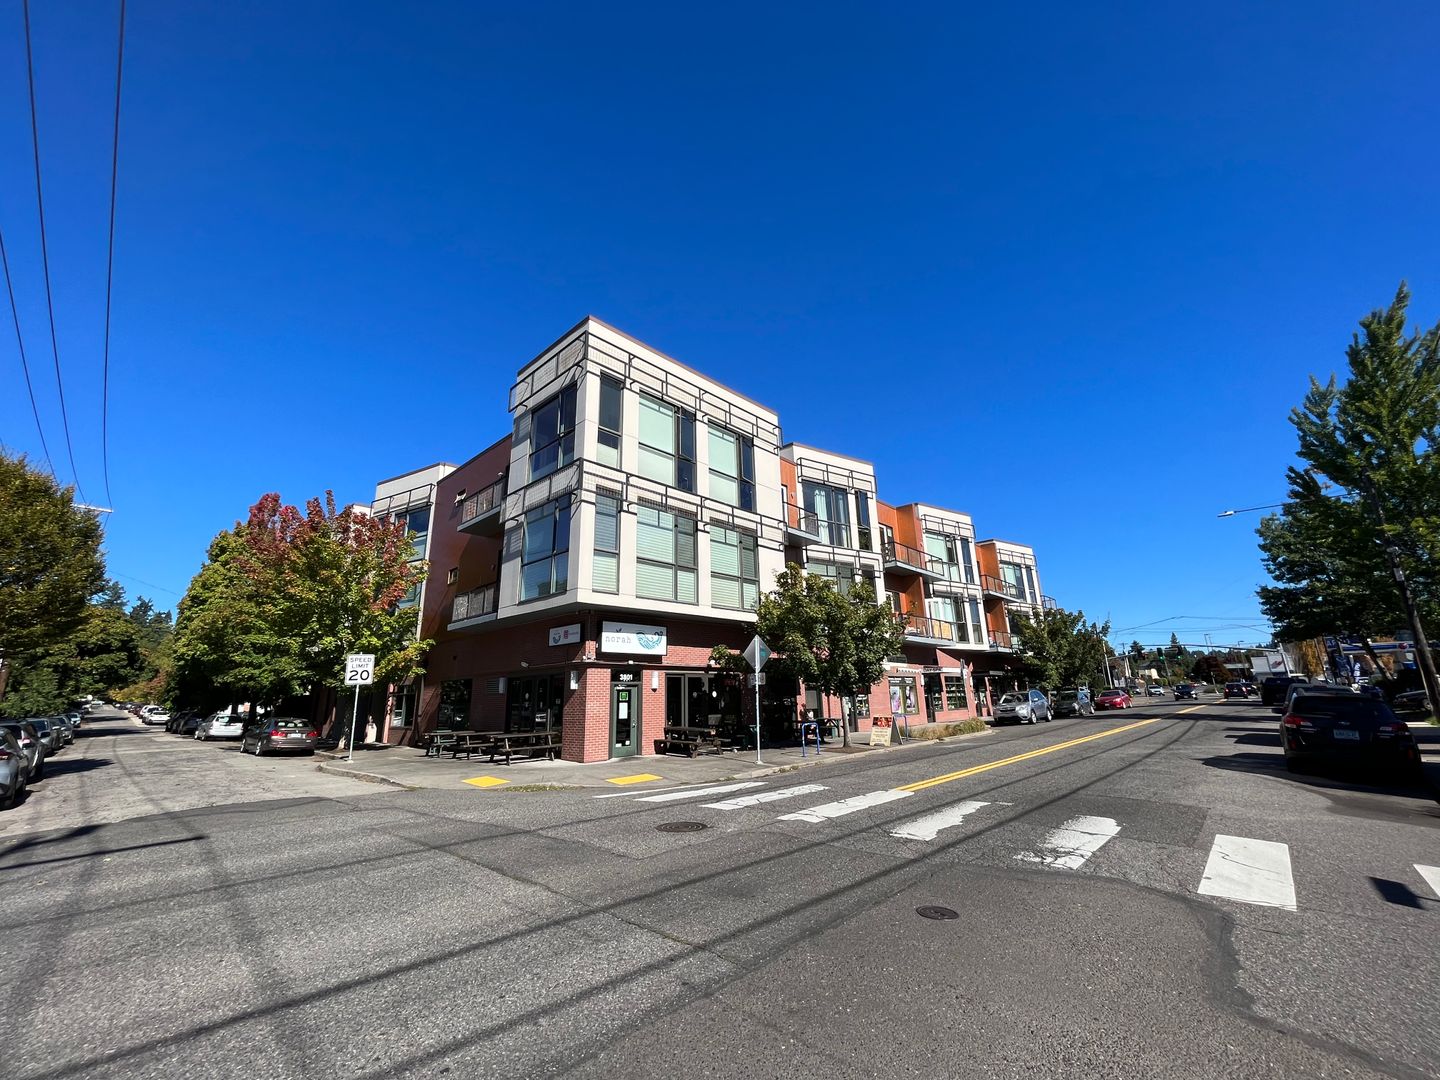 2 Bed + 2 Bath Condo in the Belmont District Portland ~ Secured Garage Parking, Washer & Dryer in Unit & Heated Bathroom Floors!!